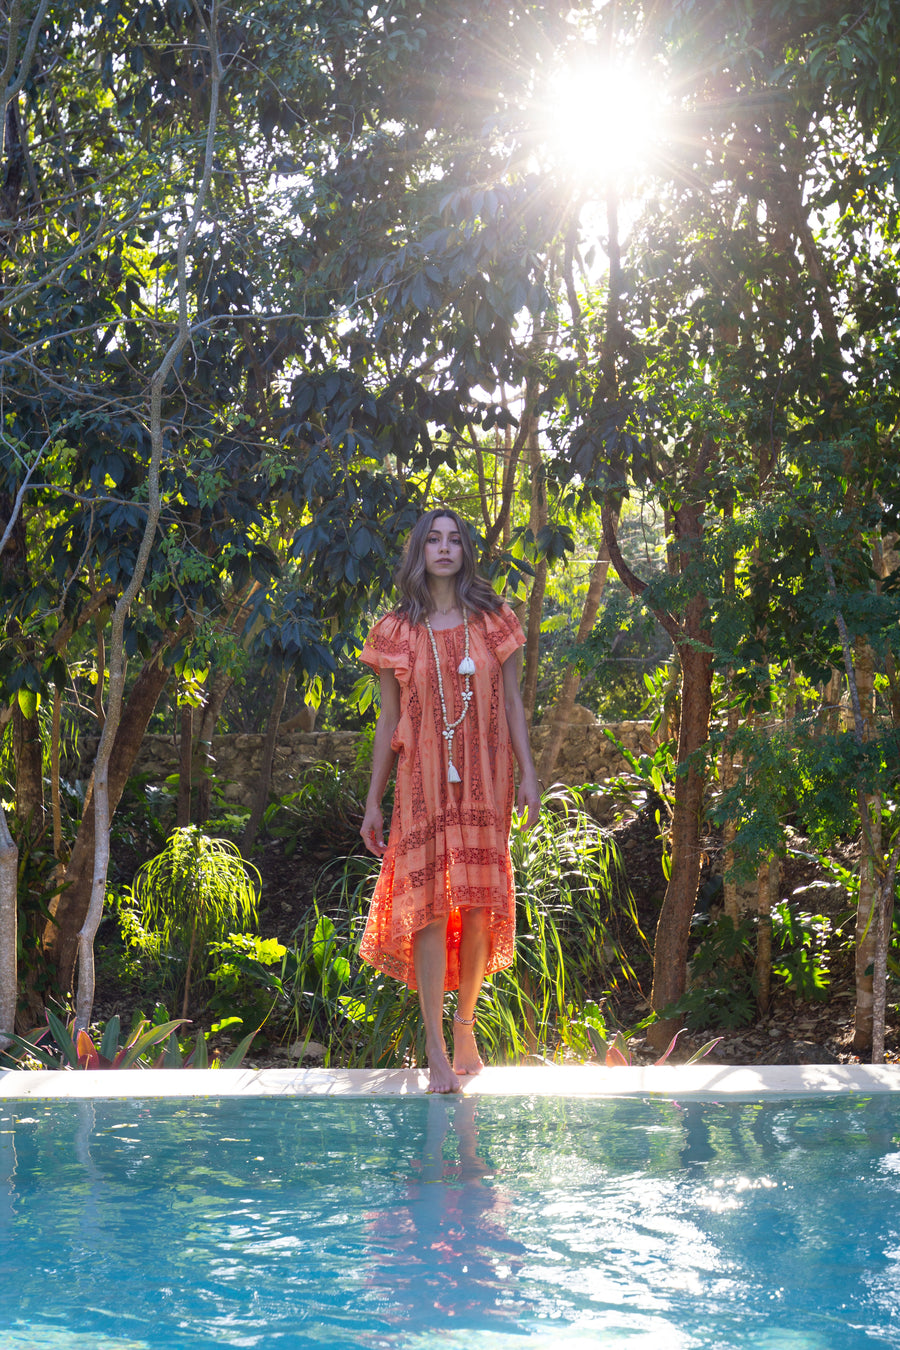 This is a photo of a woman wearing an orange cover up. She stands on the edge of a pool with greenery behind her.